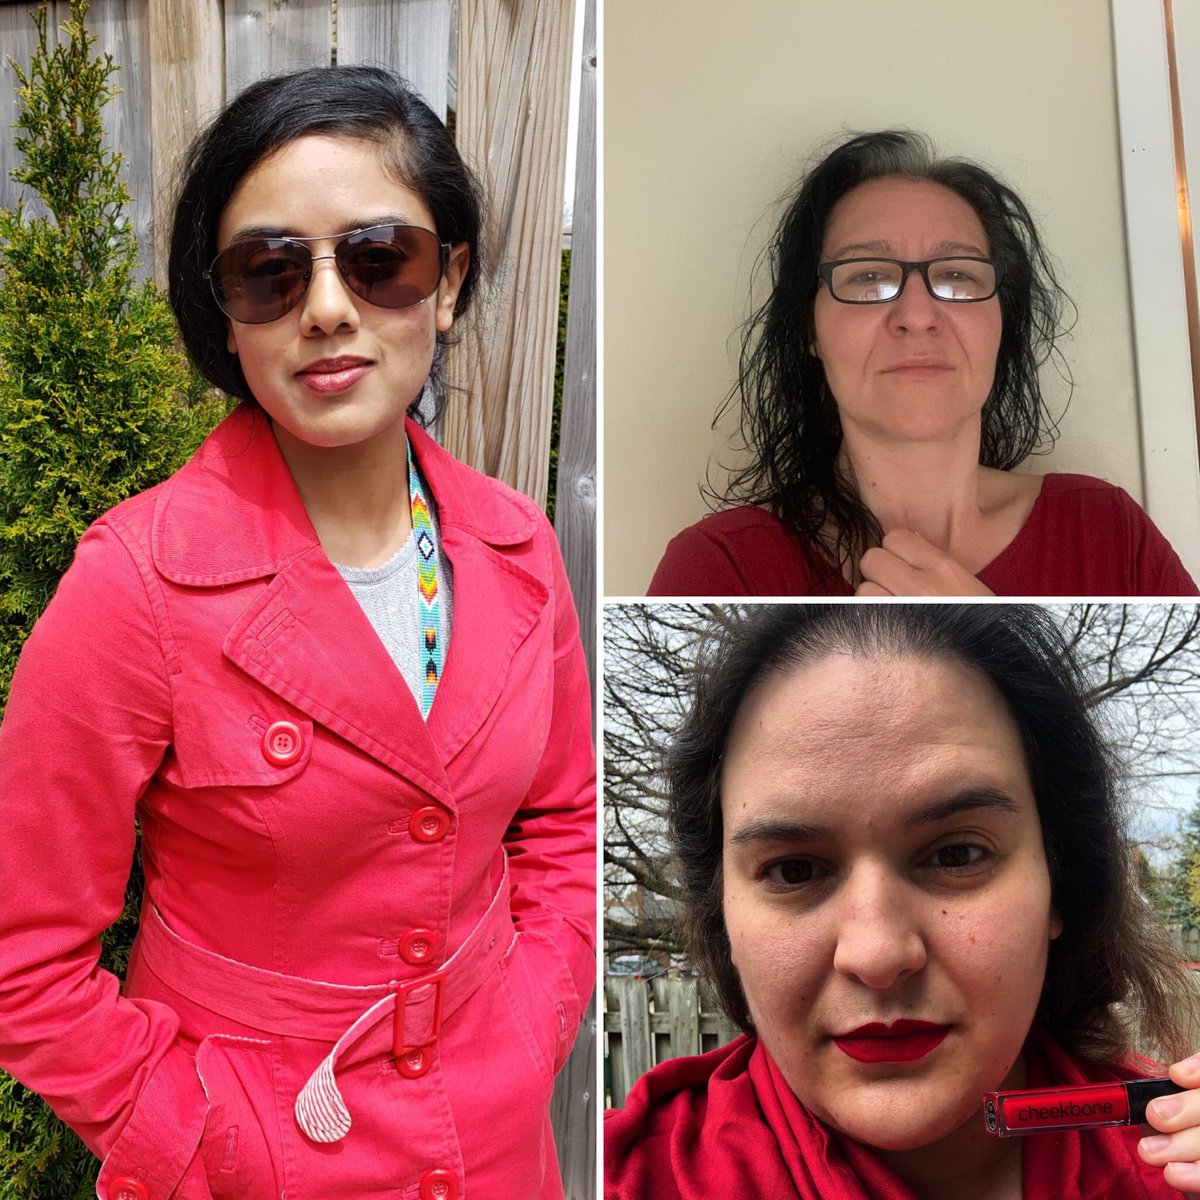 Today the MT Space team wears red to honour Missing and Murdered Indigenous Women and Girls across the nation. Let’s take action today and every day to end this violence.

#WearRed #RedDressDay #NoMoreMMIWG #MMIWGActionNow